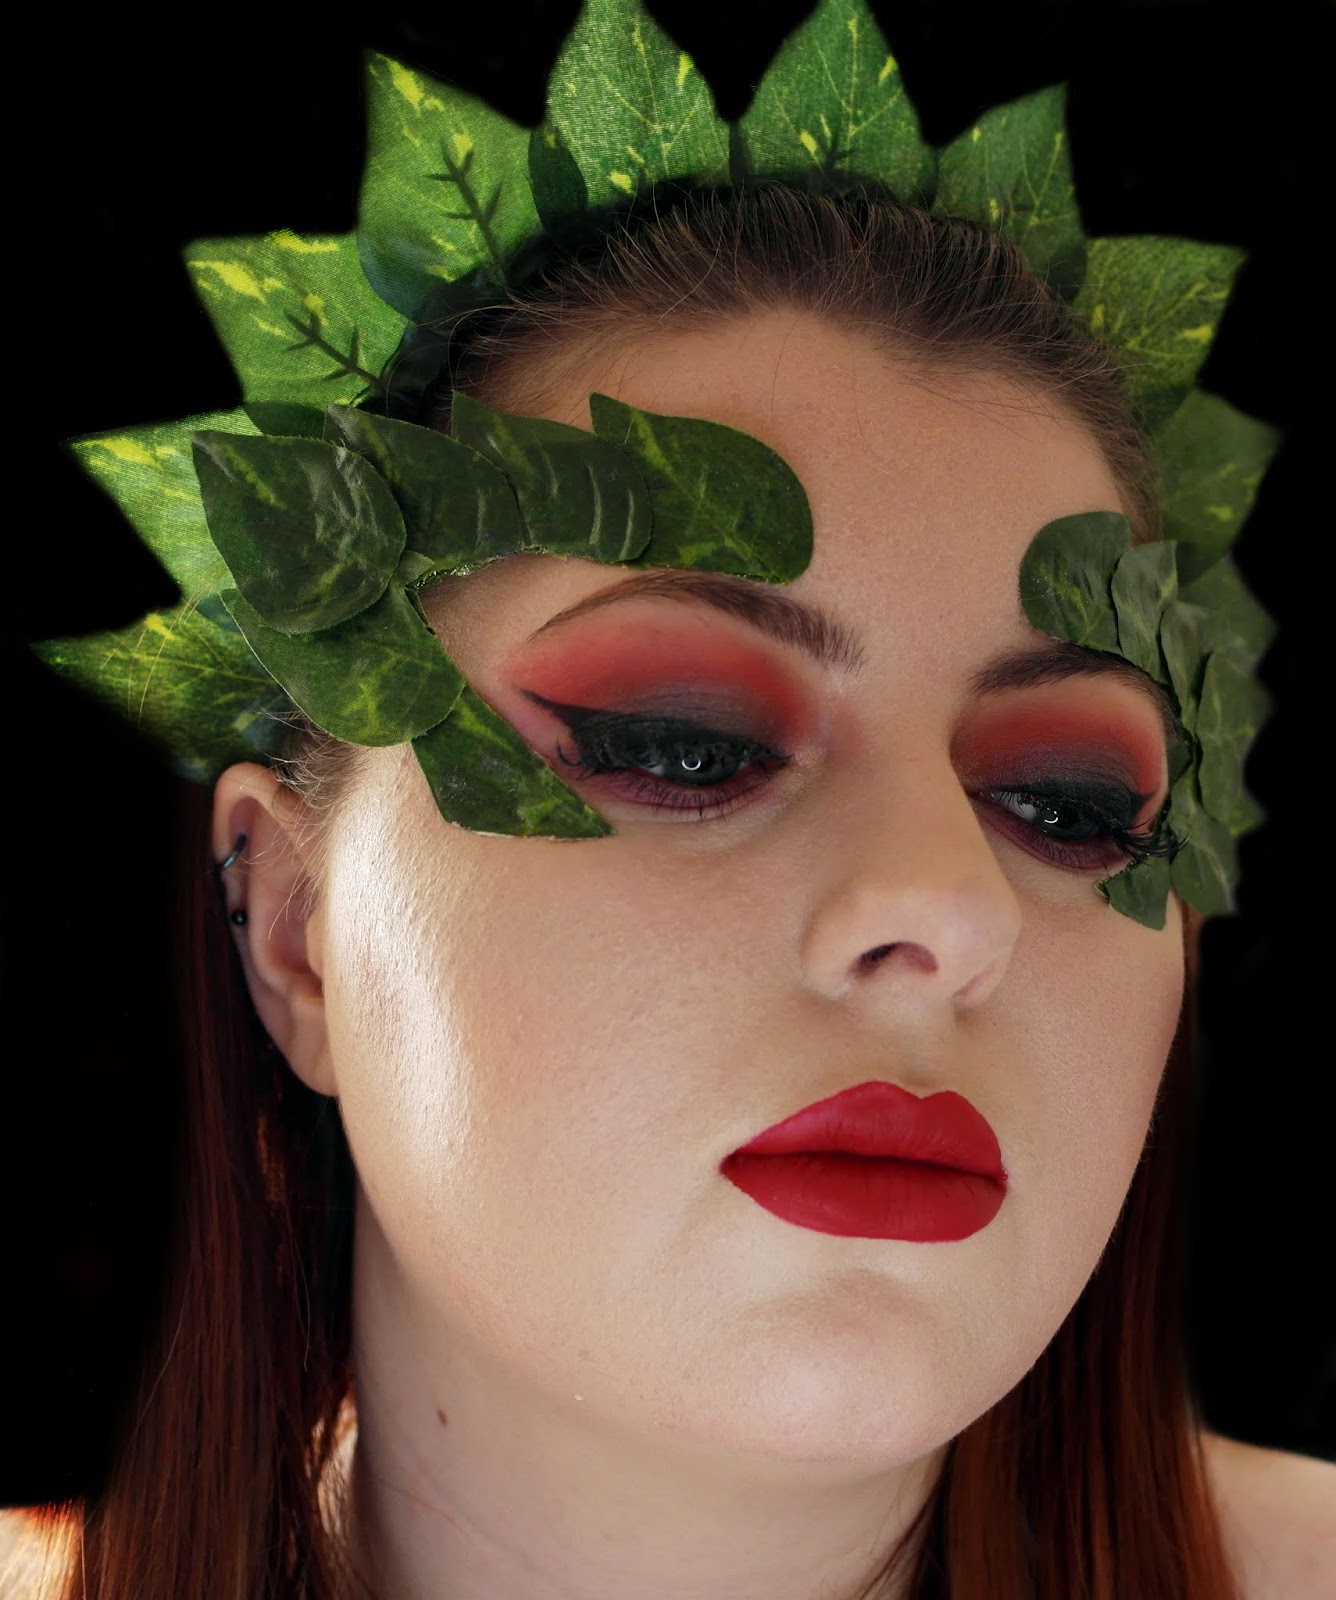 Studs And Flicks 10 Days Of Halloween 2018 Poison Ivy Makeup Accessories,Poison Sumac Tree Bark